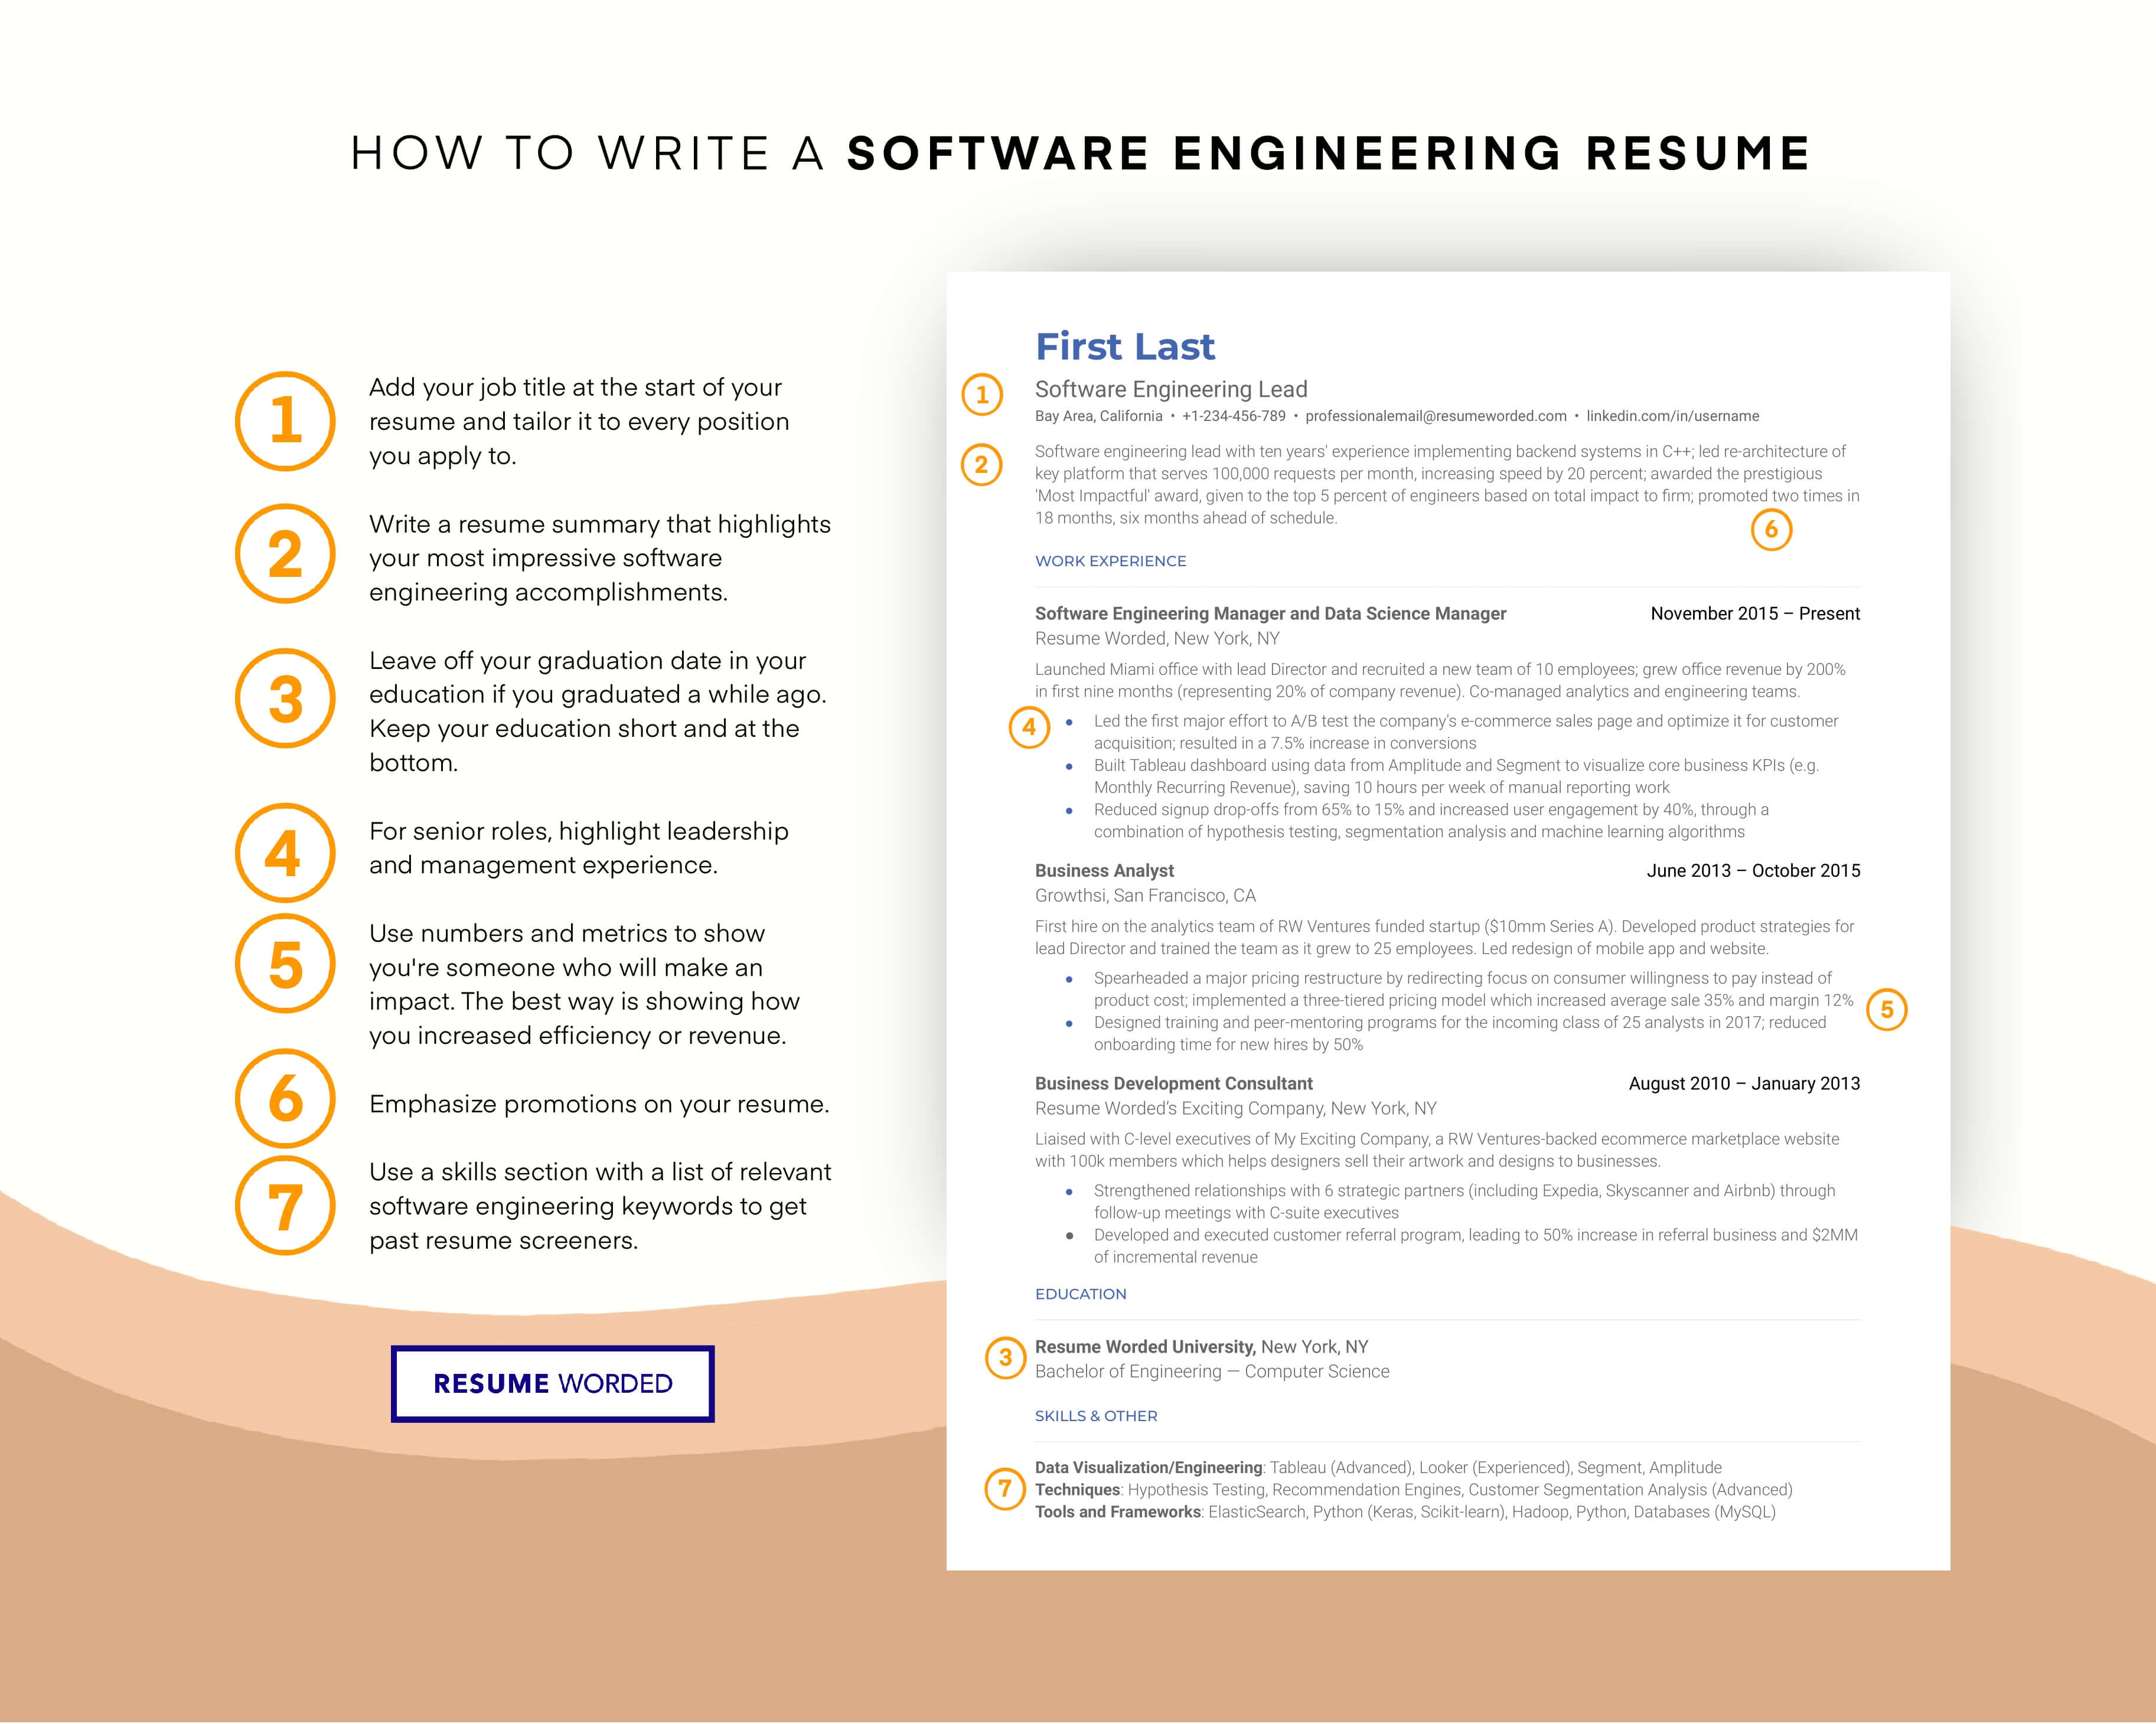 Include your competency in using AWS software. - AWS Data Engineer Resume